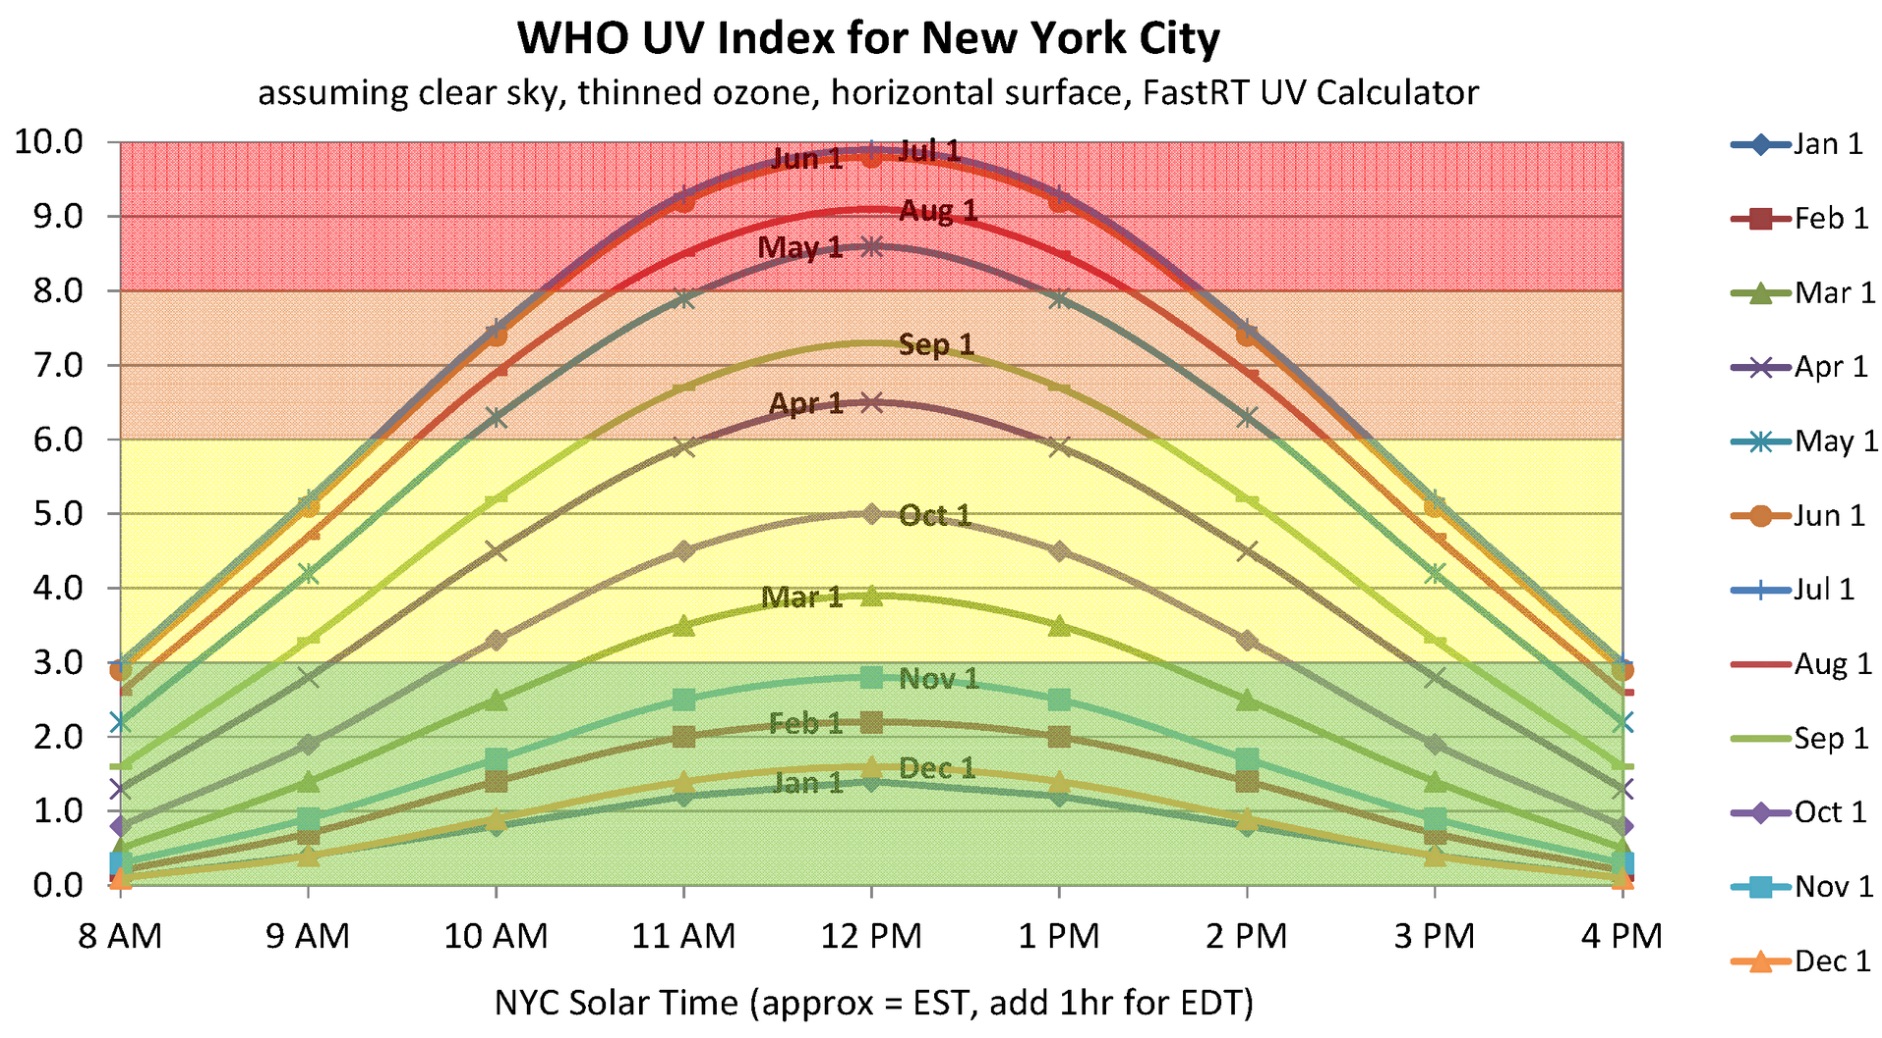 WHO UV Index for New York City